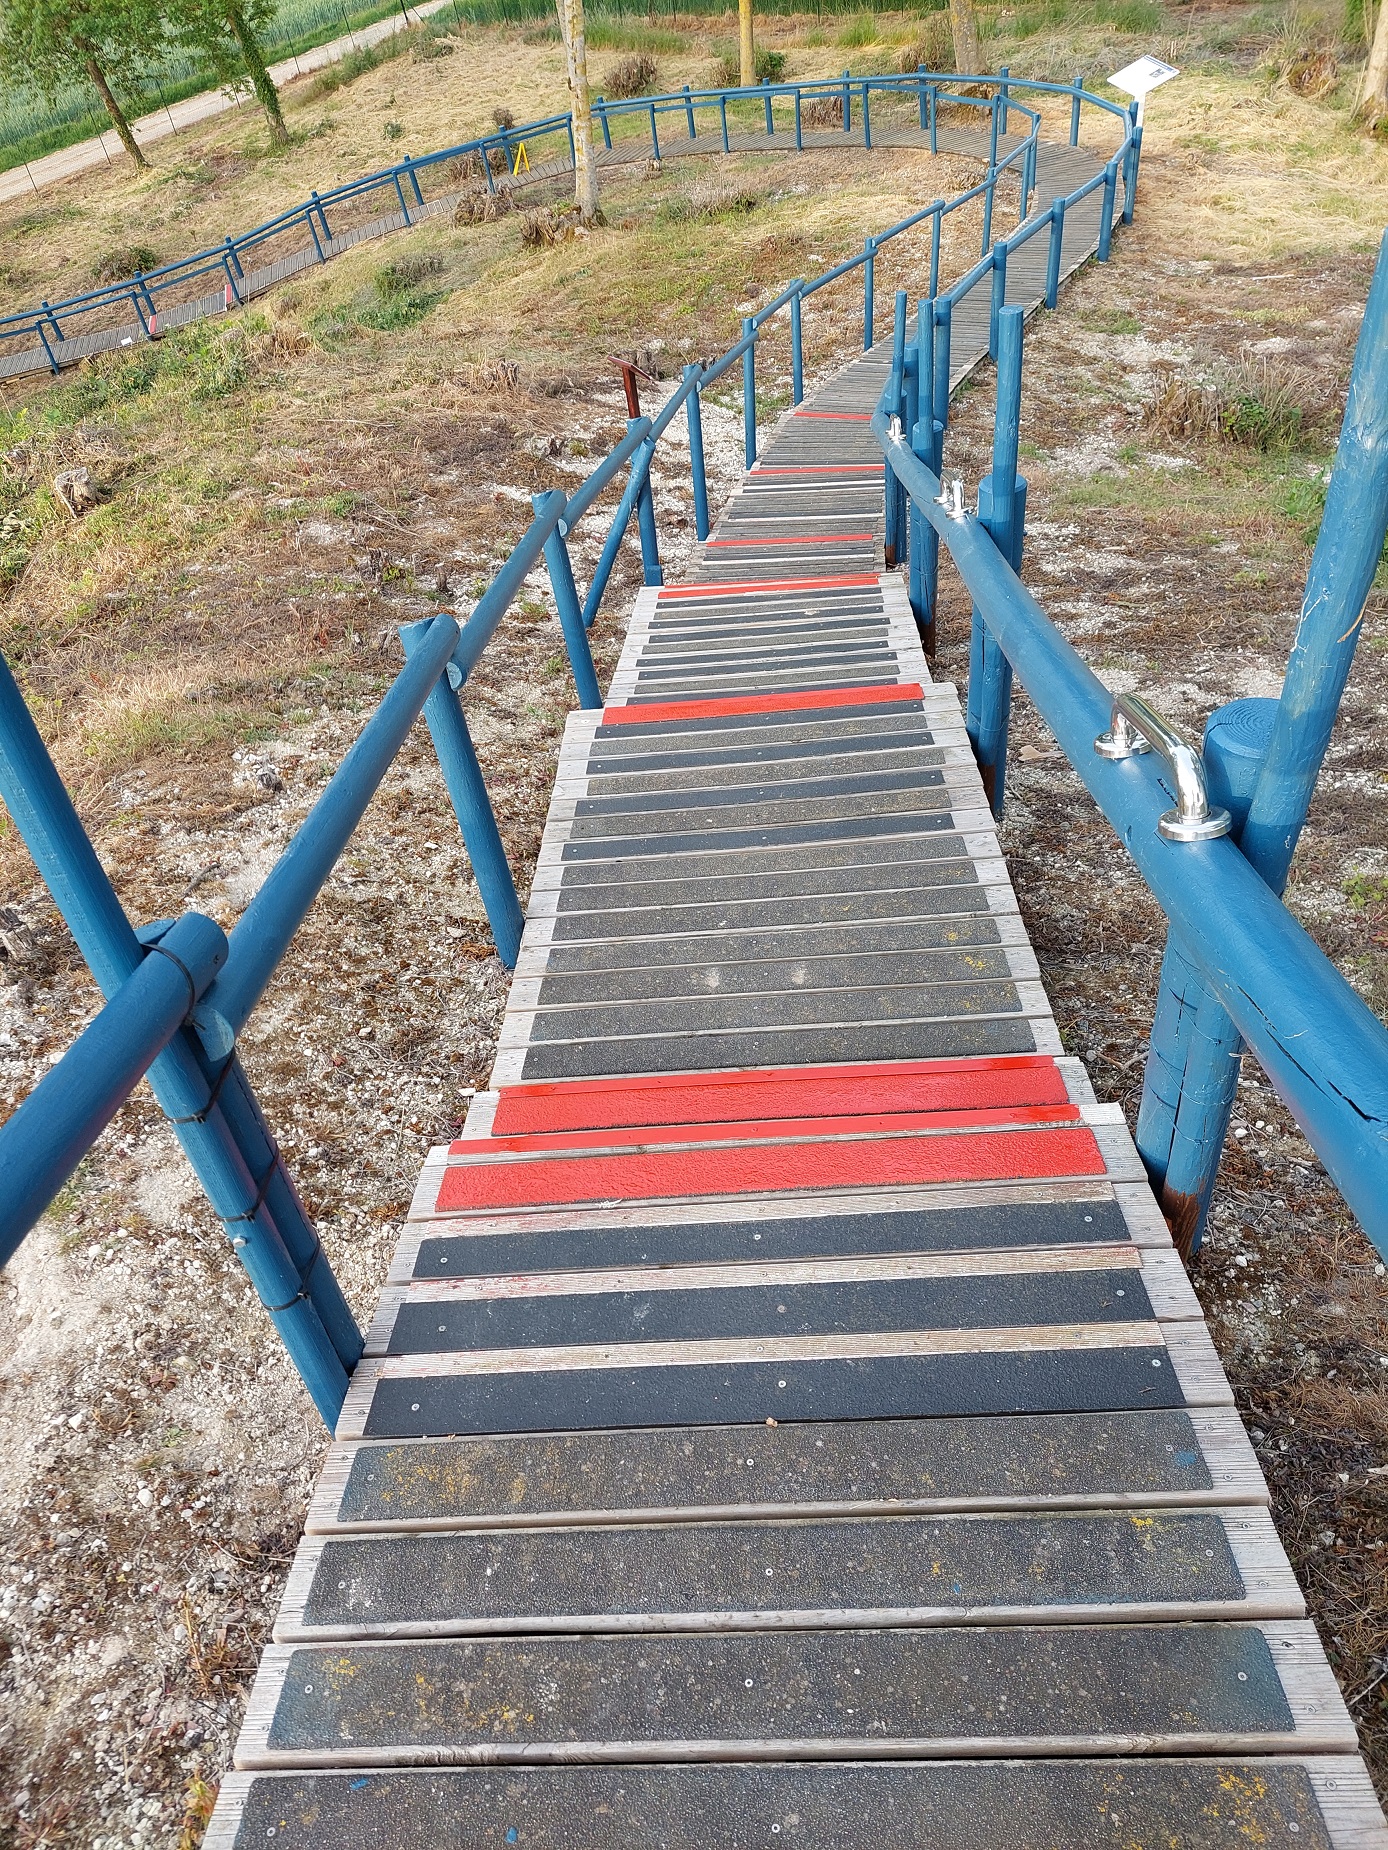 "Red edges looking quite nice".  The warning red step edges were painted in June Taken by Bob Paterson June 2022